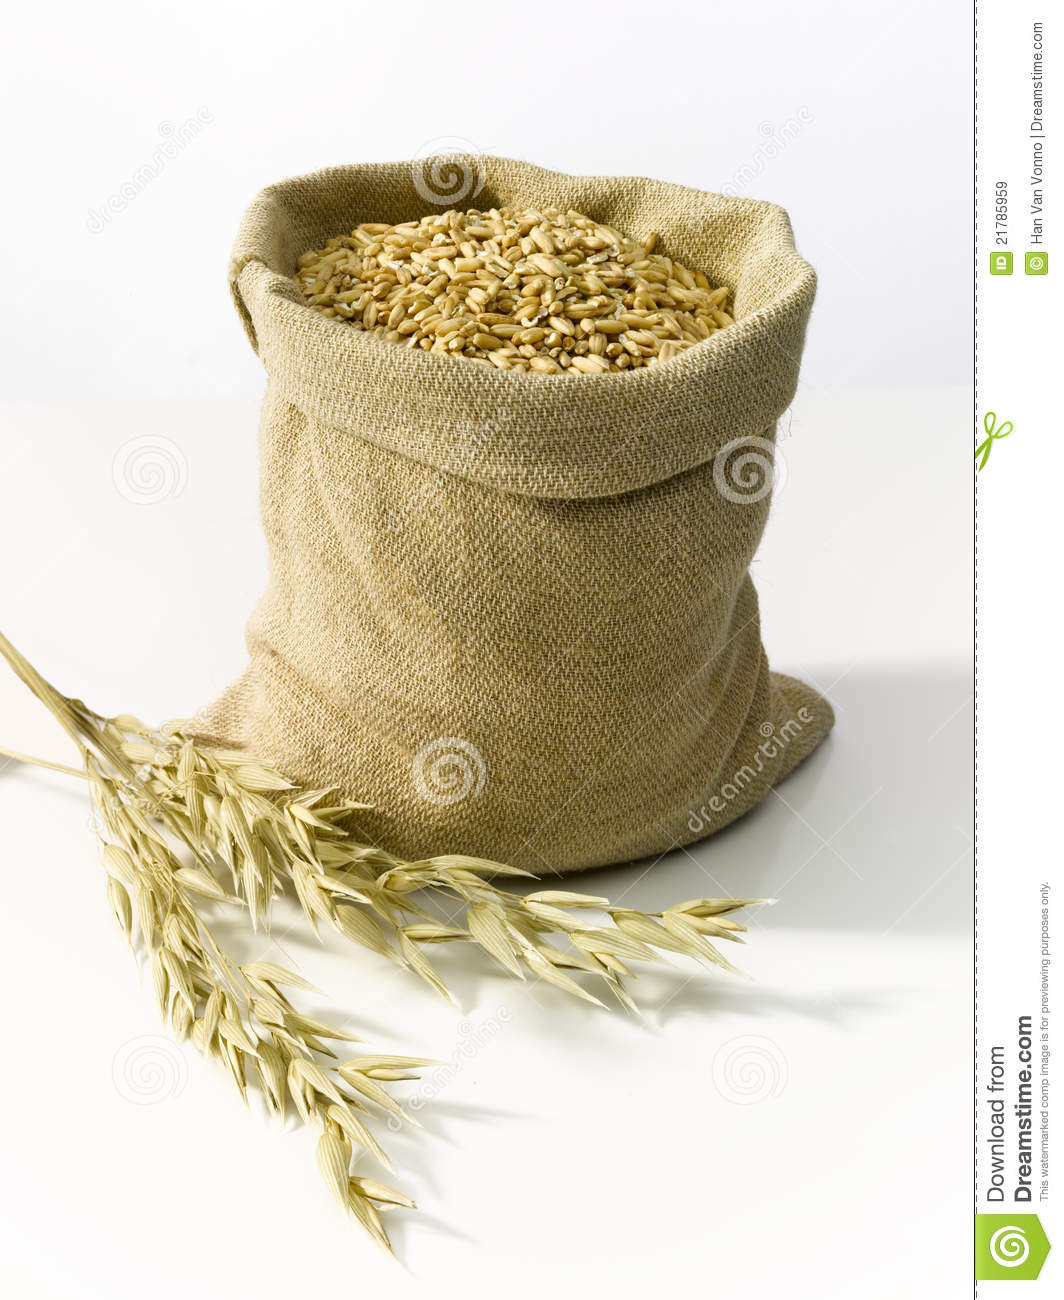 Burlap Bag With Grain Royalty Free Stock Images   Image  21785959